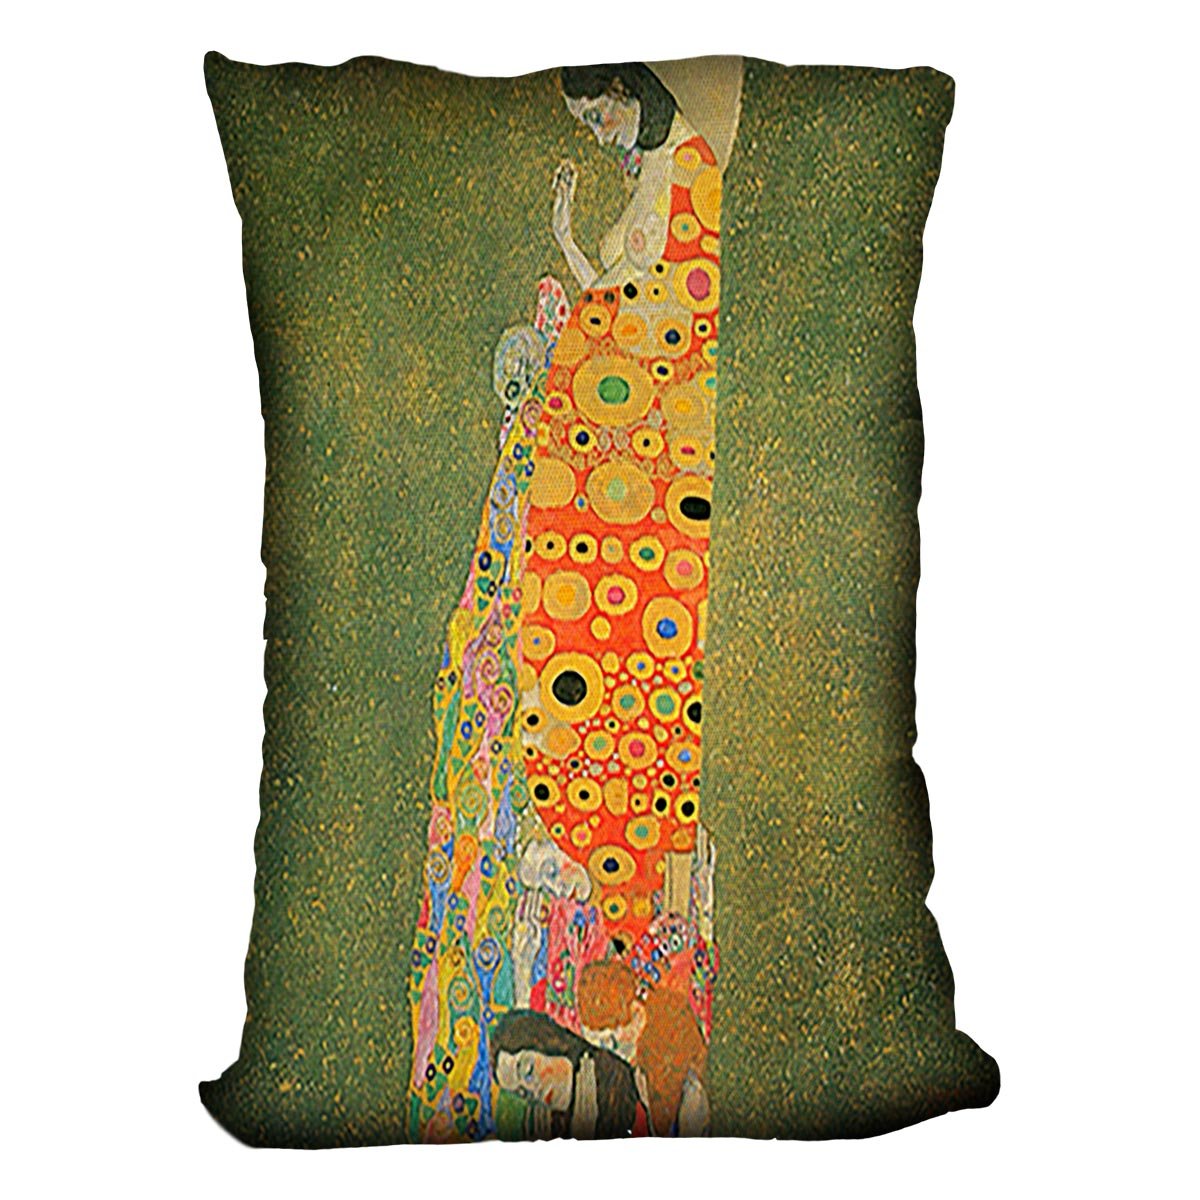 Abandoned Hope by Klimt Throw Pillow